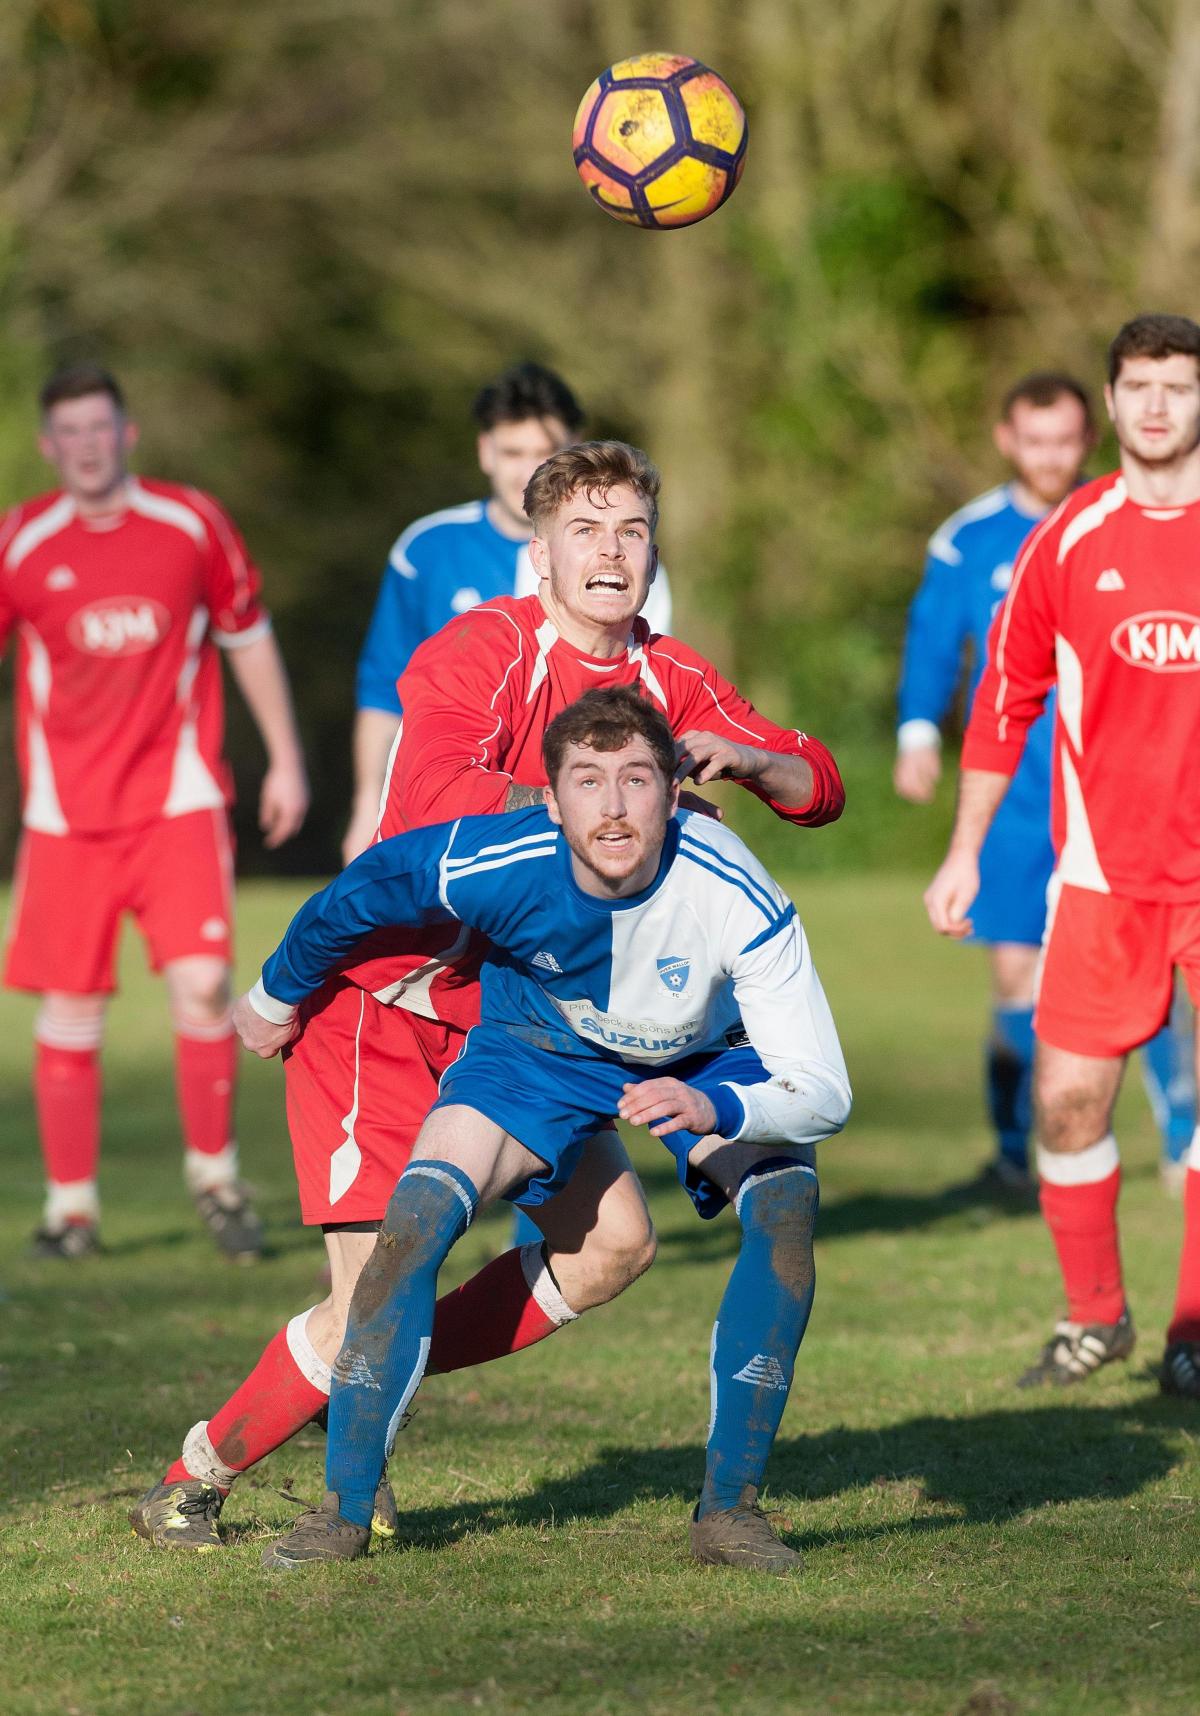 Andover & District Saturday League Over Wallop v Broughton - Picture Andy Brooks